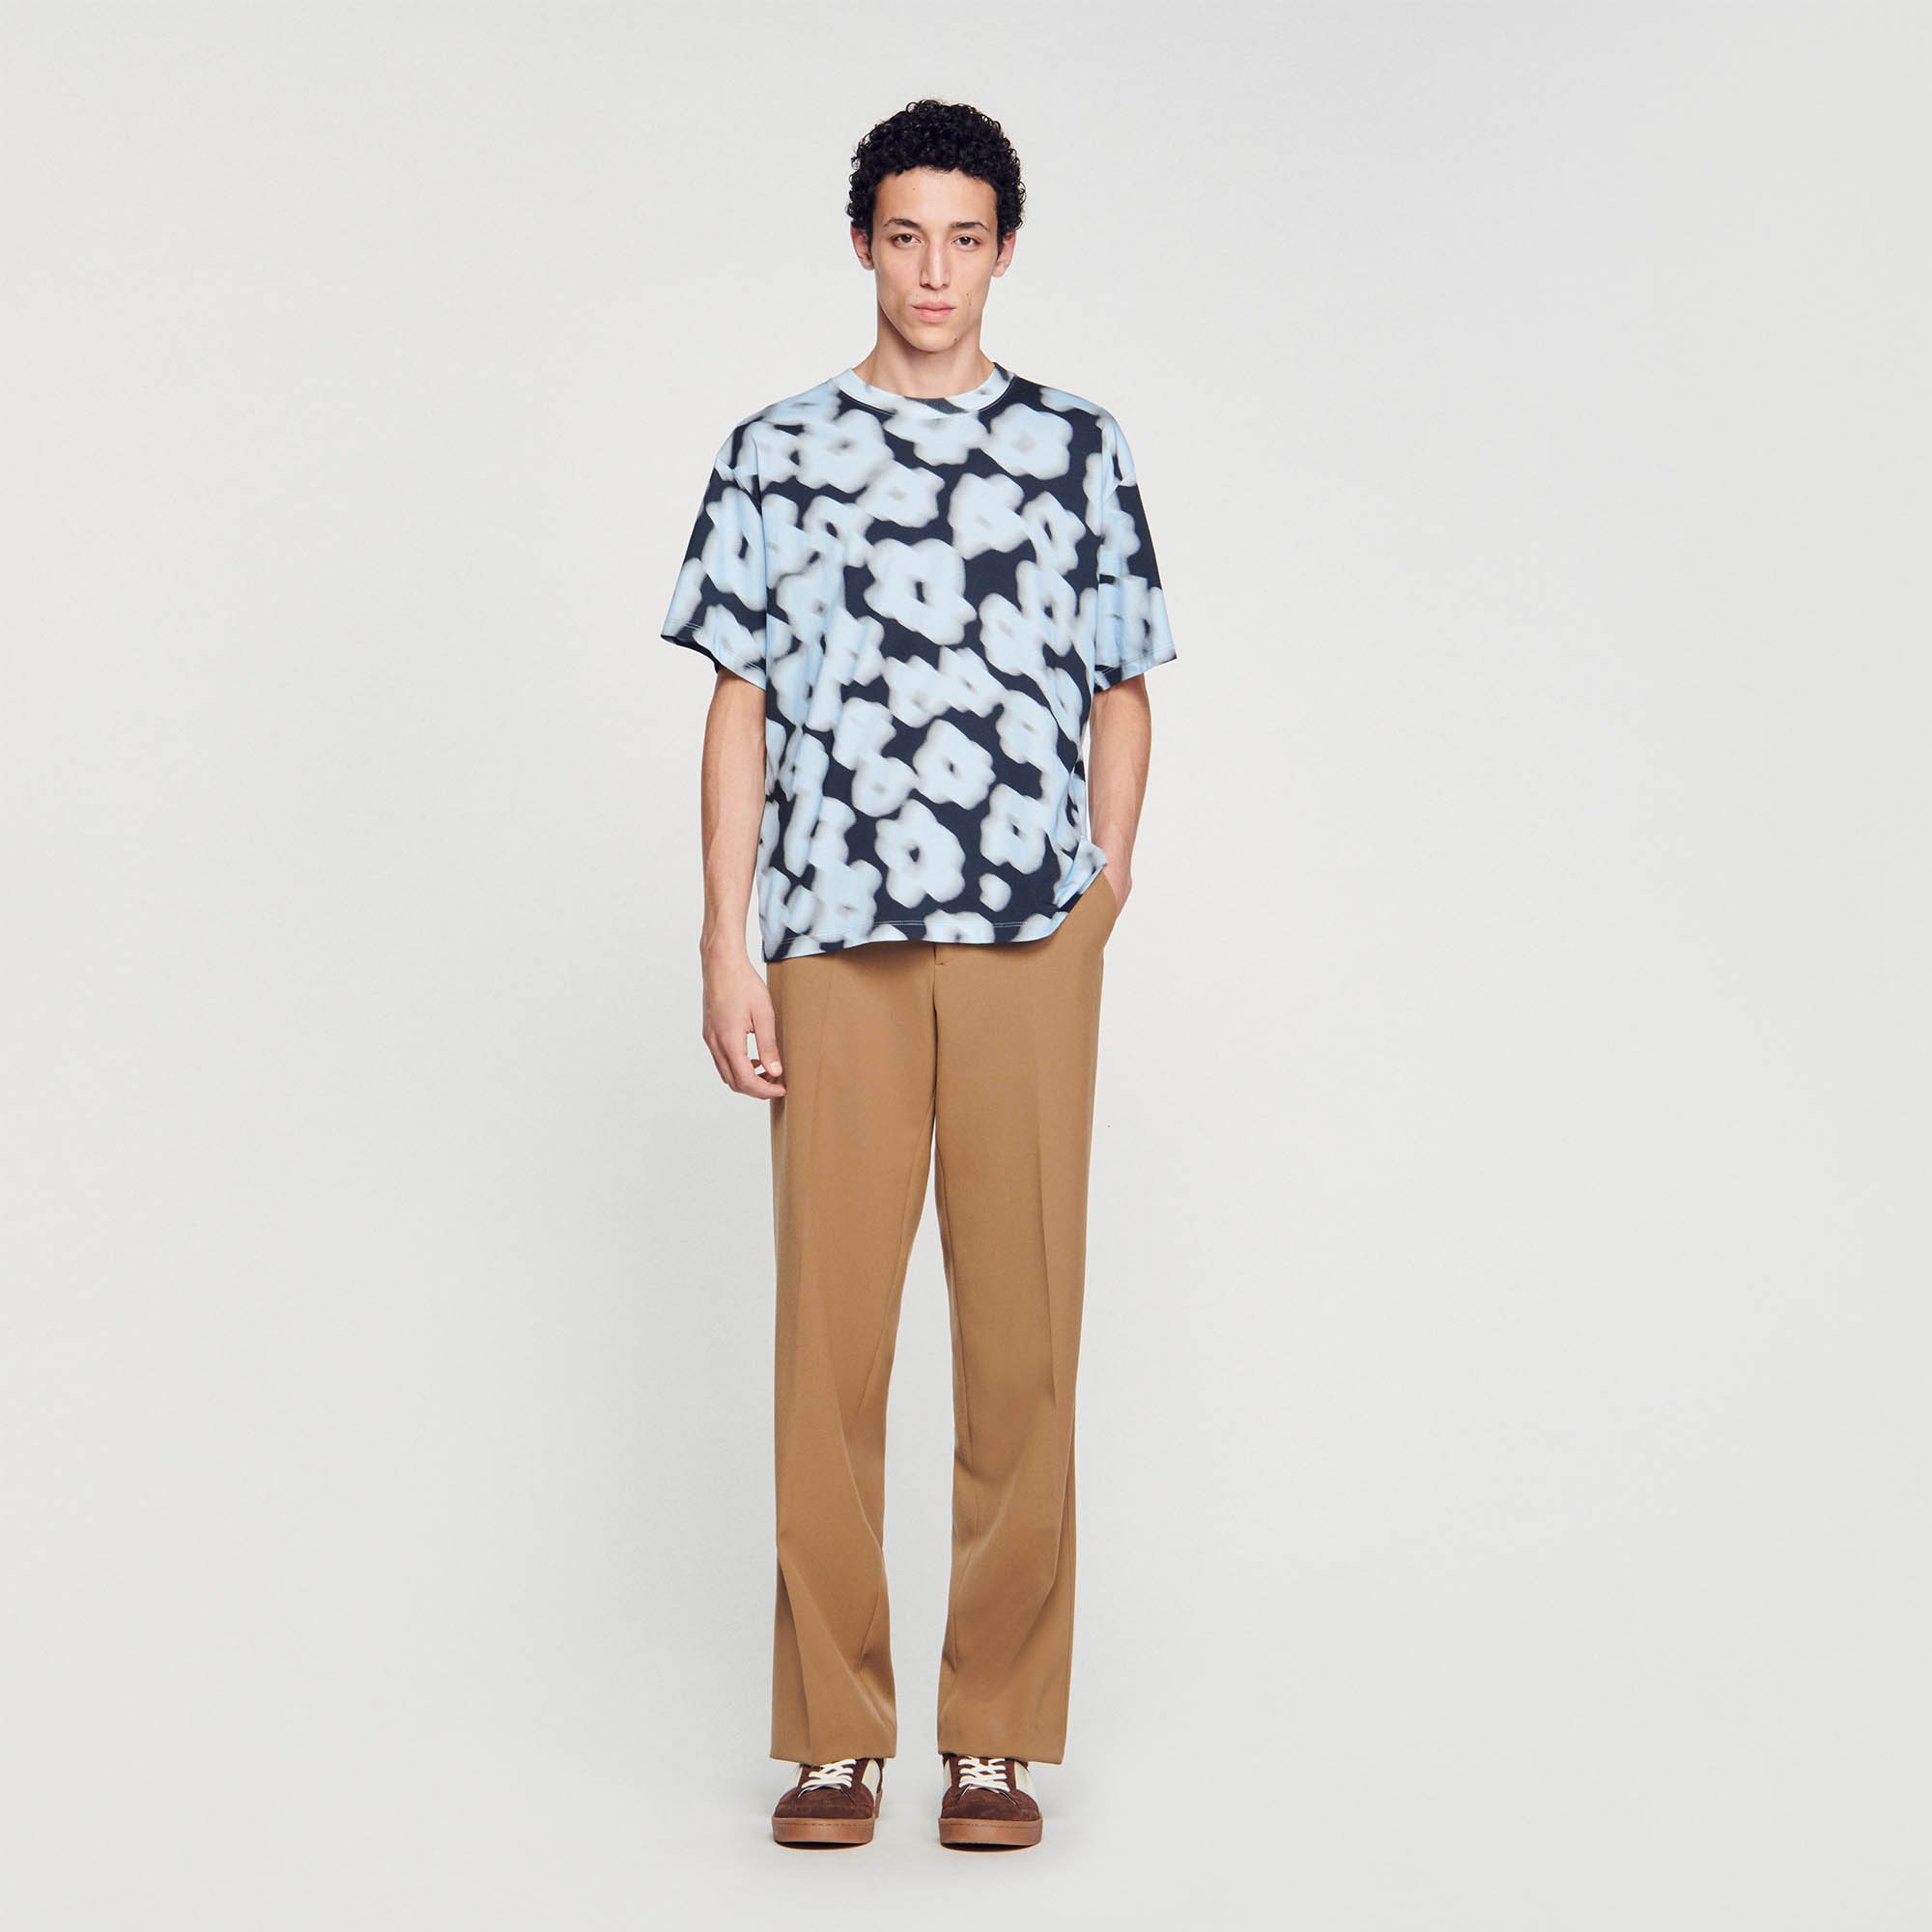 Sandro cotton Rib: Classic cotton T-shirt with round neck and short sleeve, embellished with a blurry floral pattern